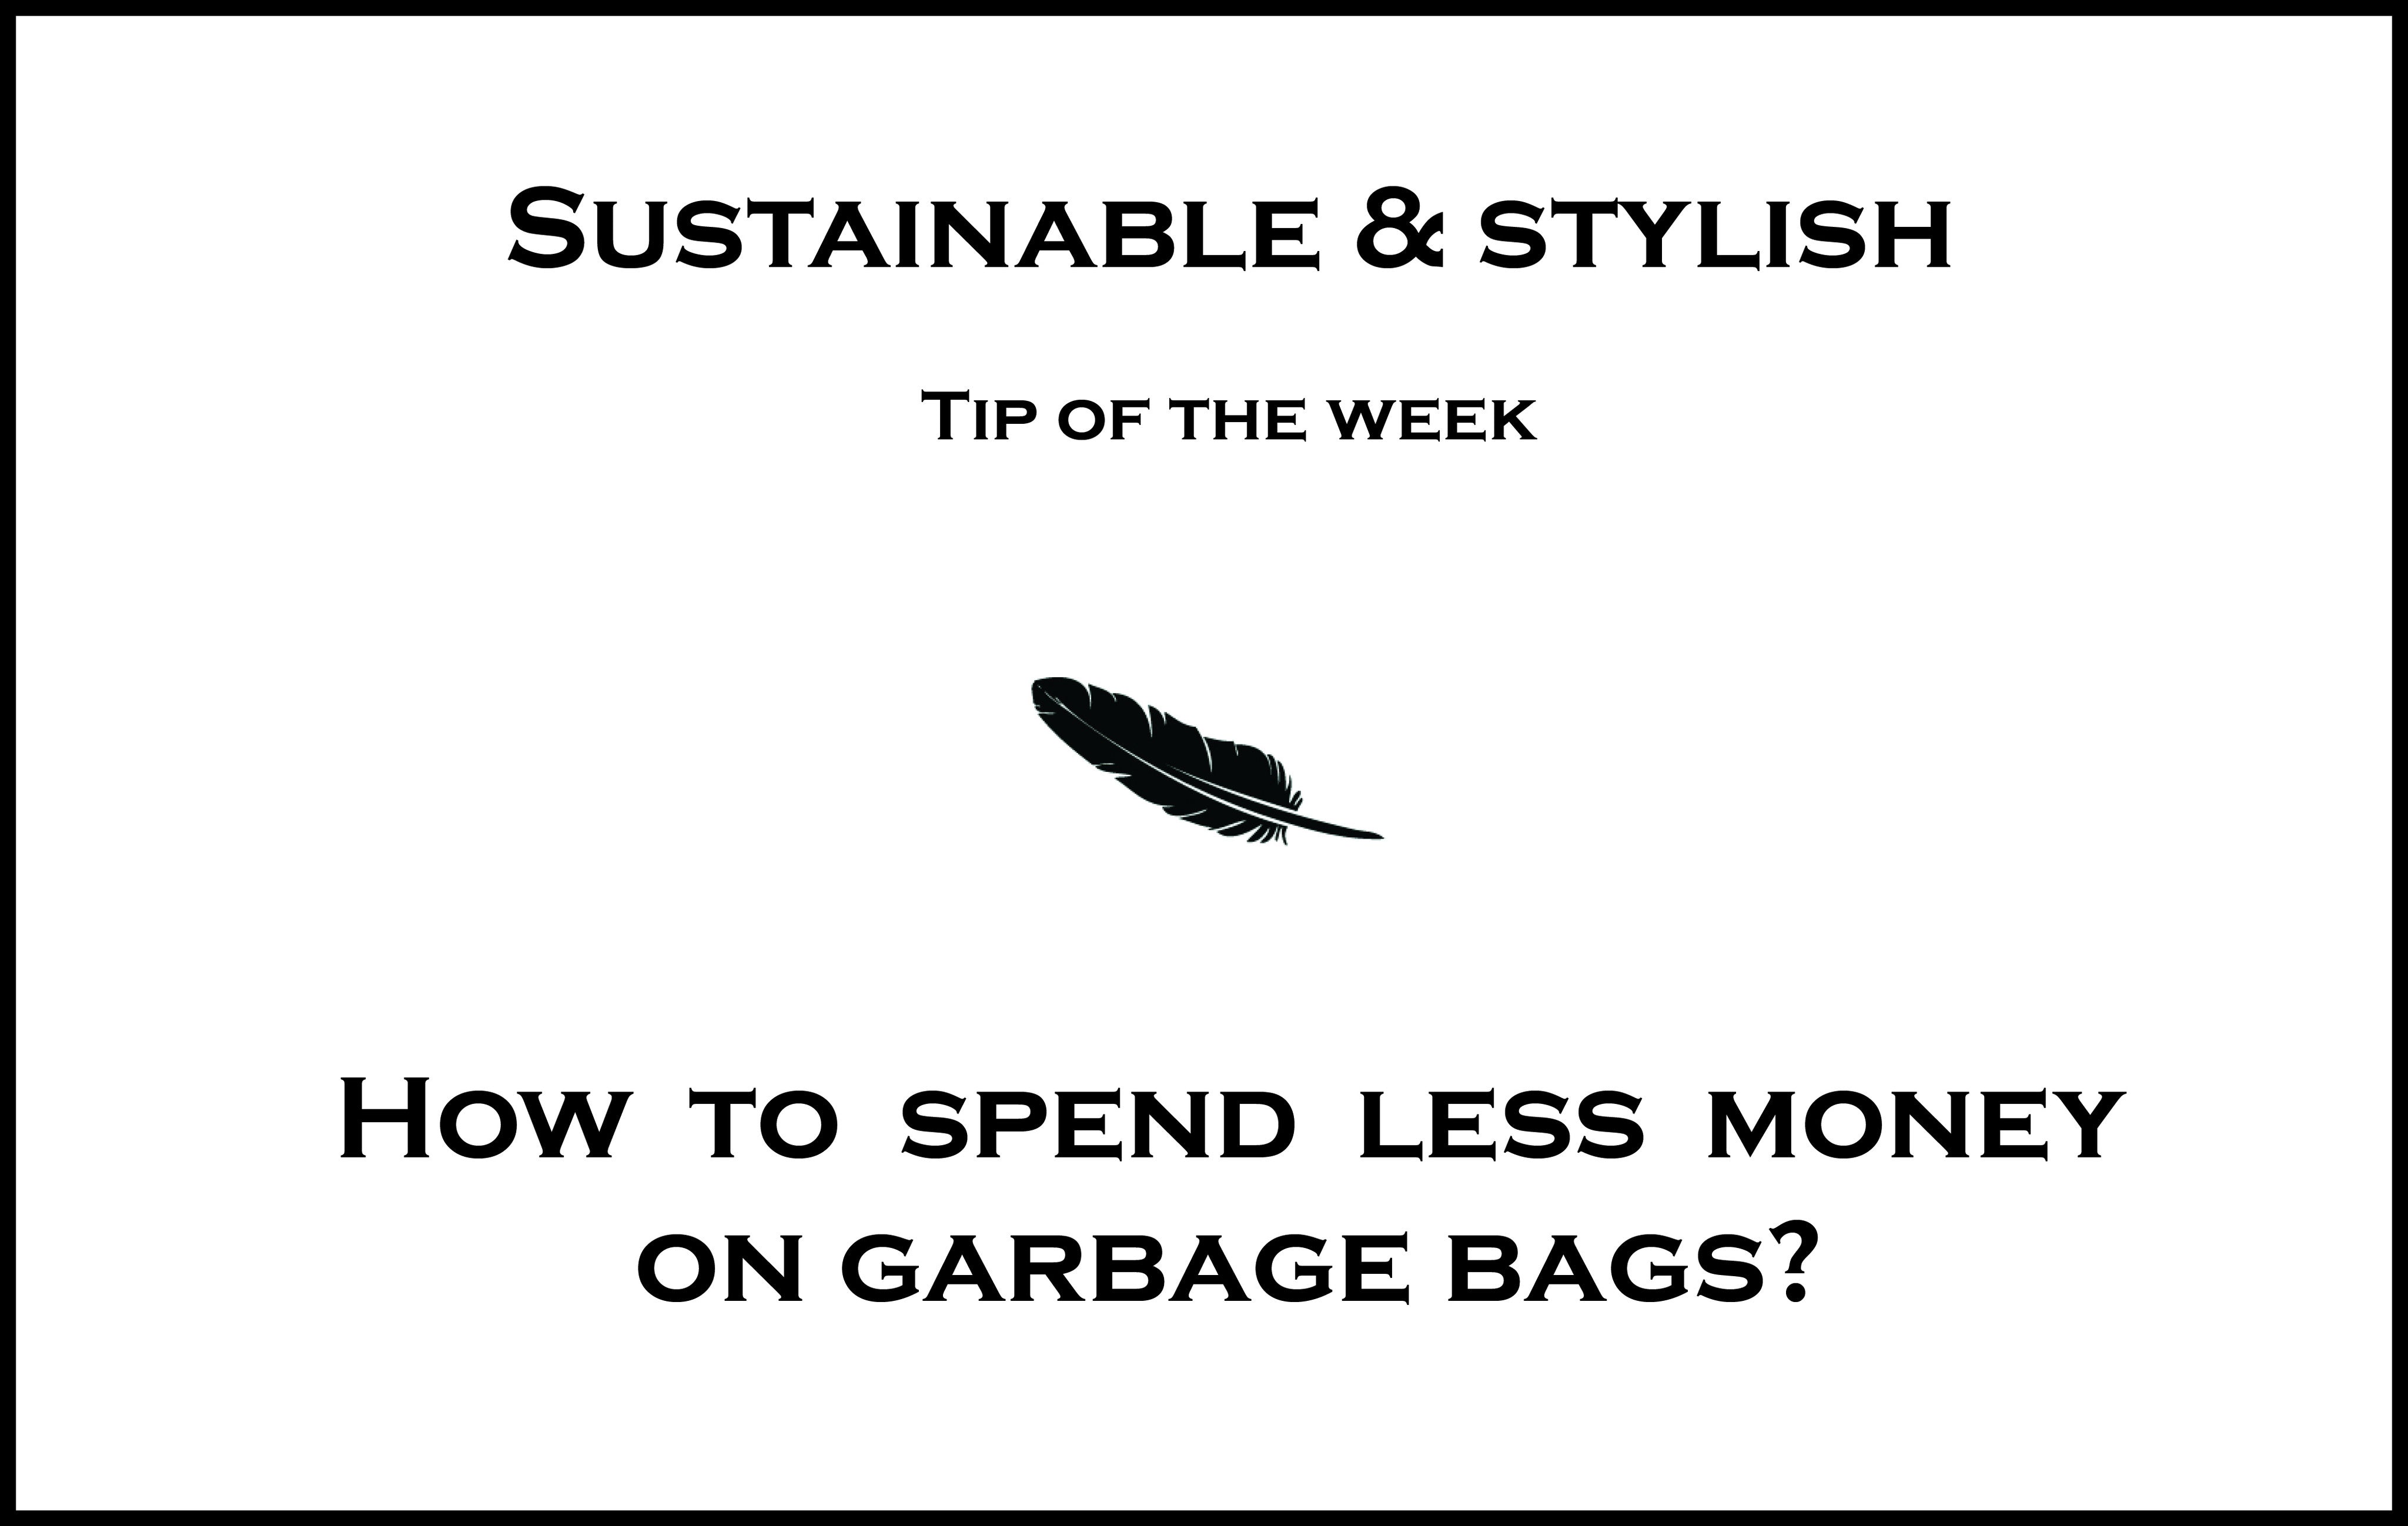 How to spend less money on garbage bags?